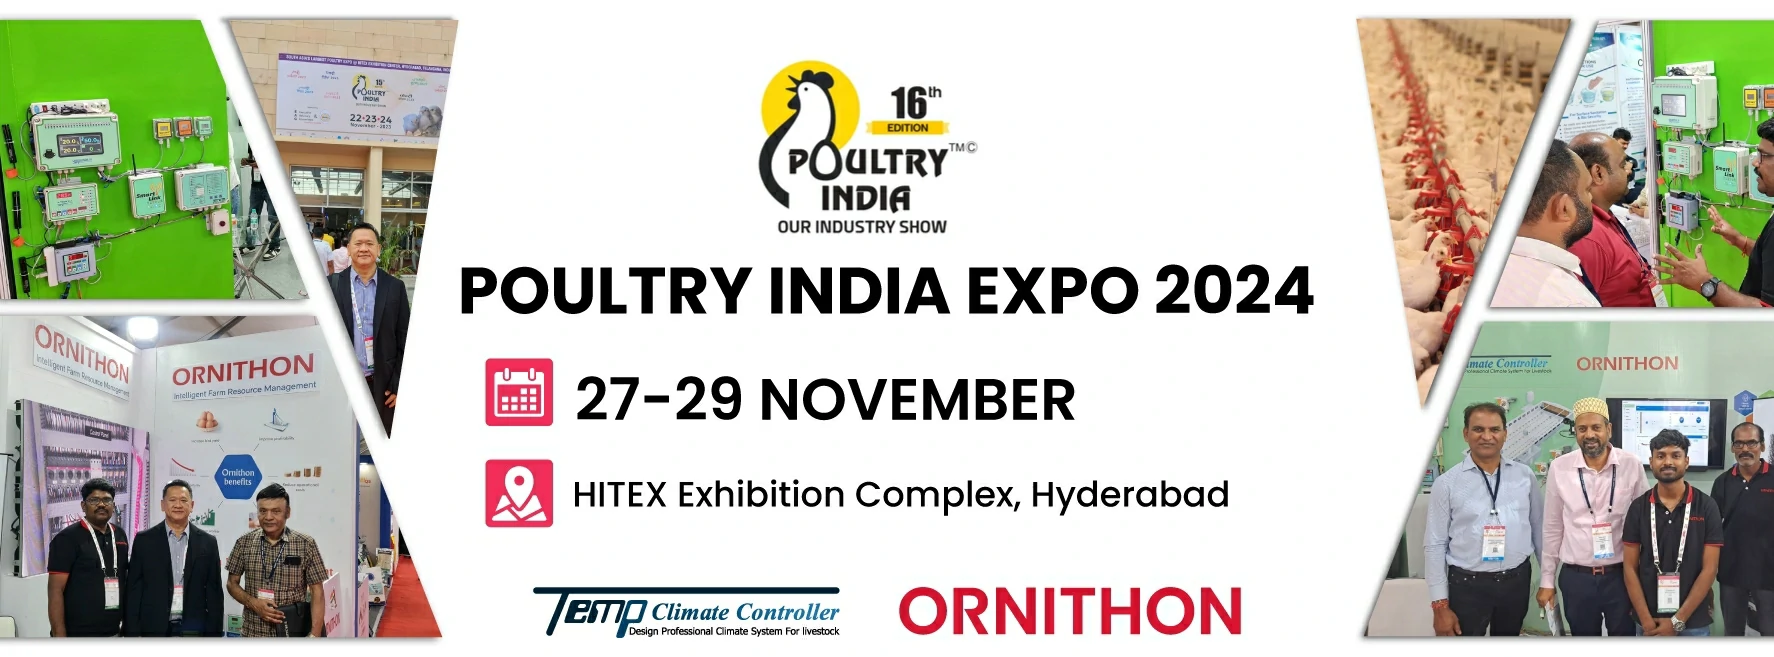 Poultry india Expo 2024